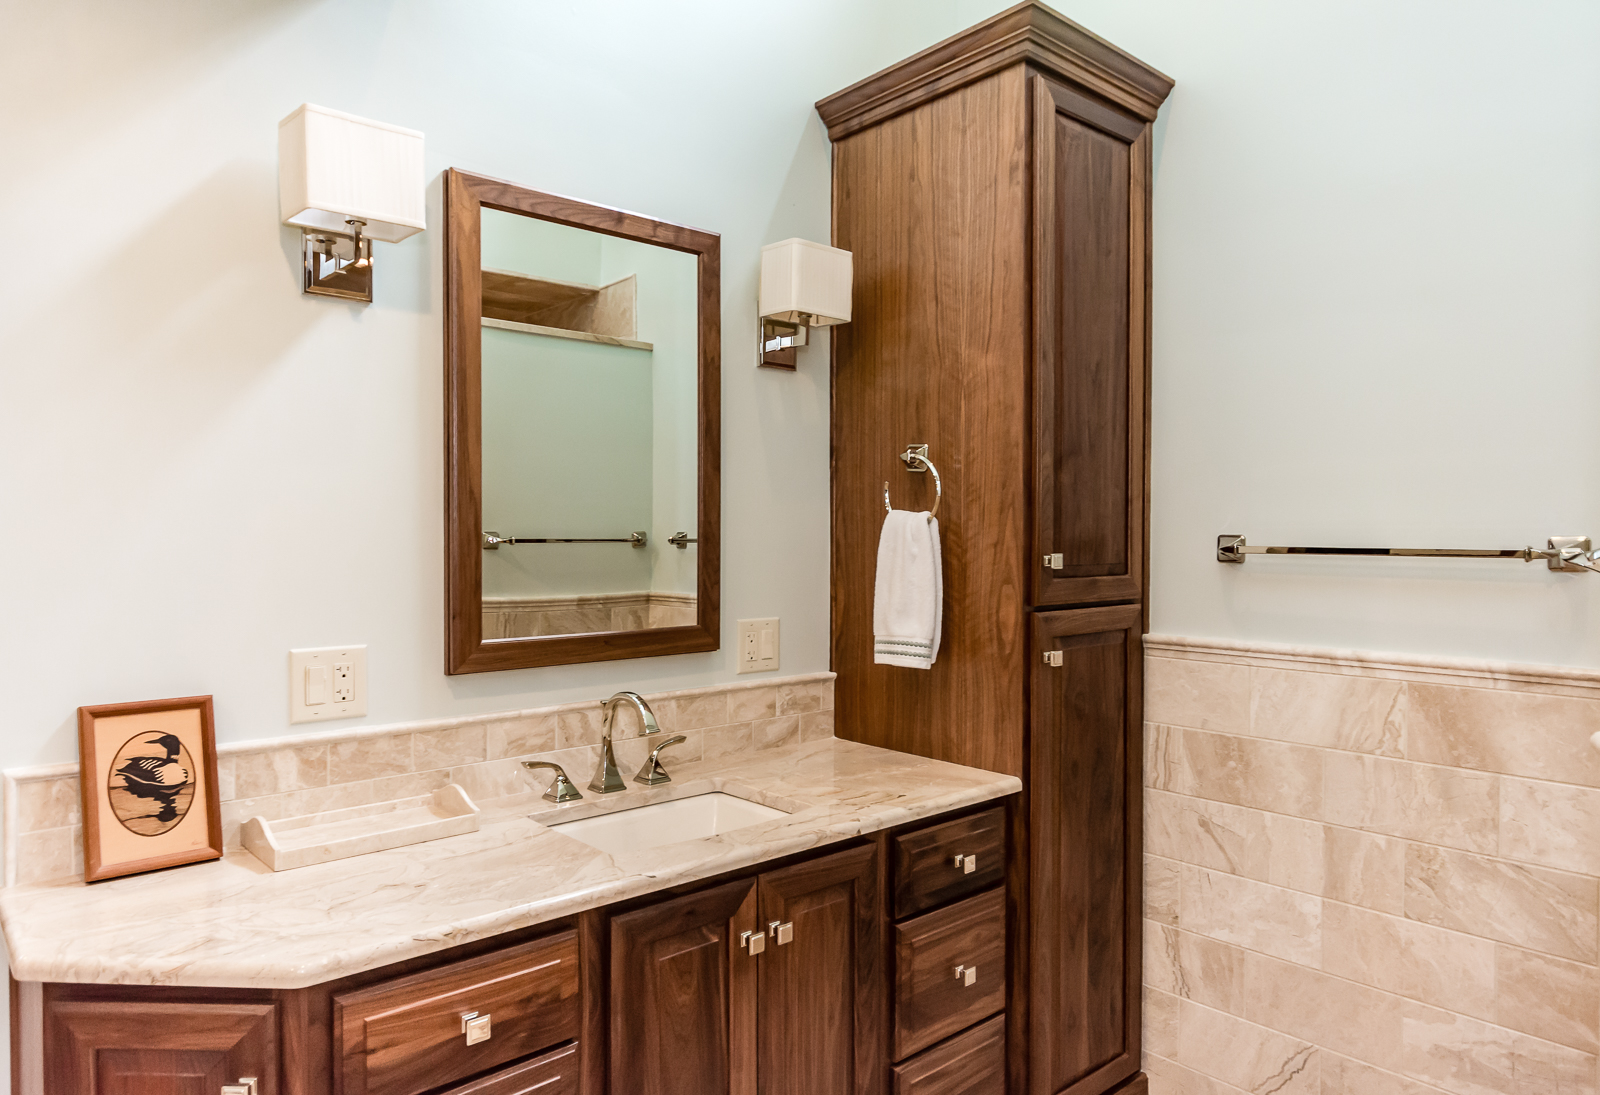 Master Bath Cabinetry